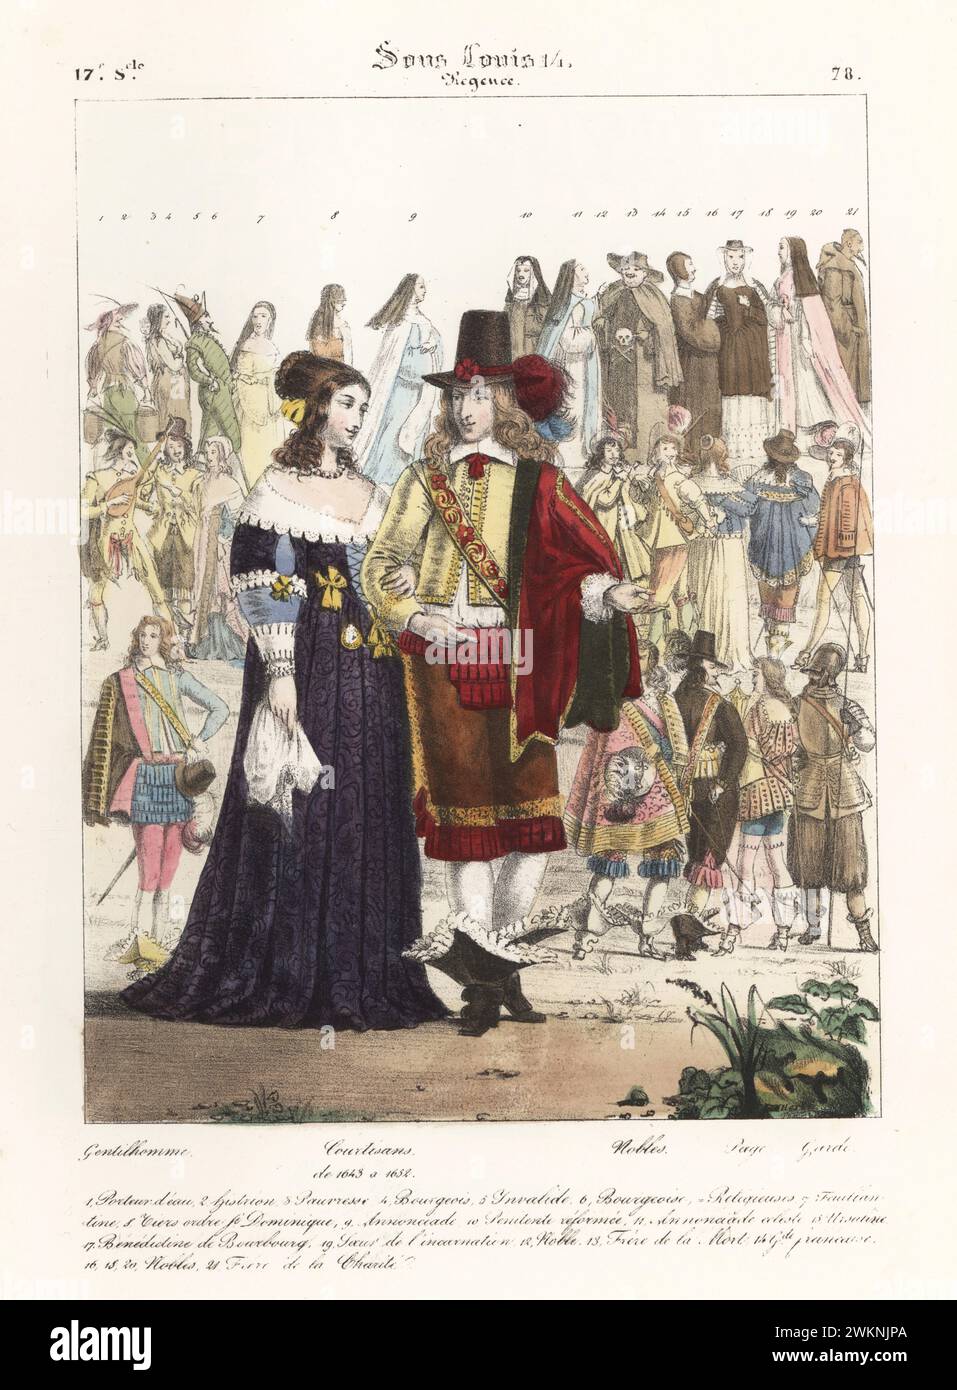 Courtiers in the reign of King Louis XIV, 18th century. Man in plumed hat, cape, jacket and frilled trousers, boots with lace. Gentilhomme, Courtisans, Nobles, Page, Garde. Sous Louis 14 Regence. Handcoloured lithograph by Godard after an illustration by Charles Auguste Herbé from his own Costumes Francais, Civils, Militaires et Religieux, French Costumes, Civil, Military and Religious, Maison Martinet, Paris, 1837. Stock Photo